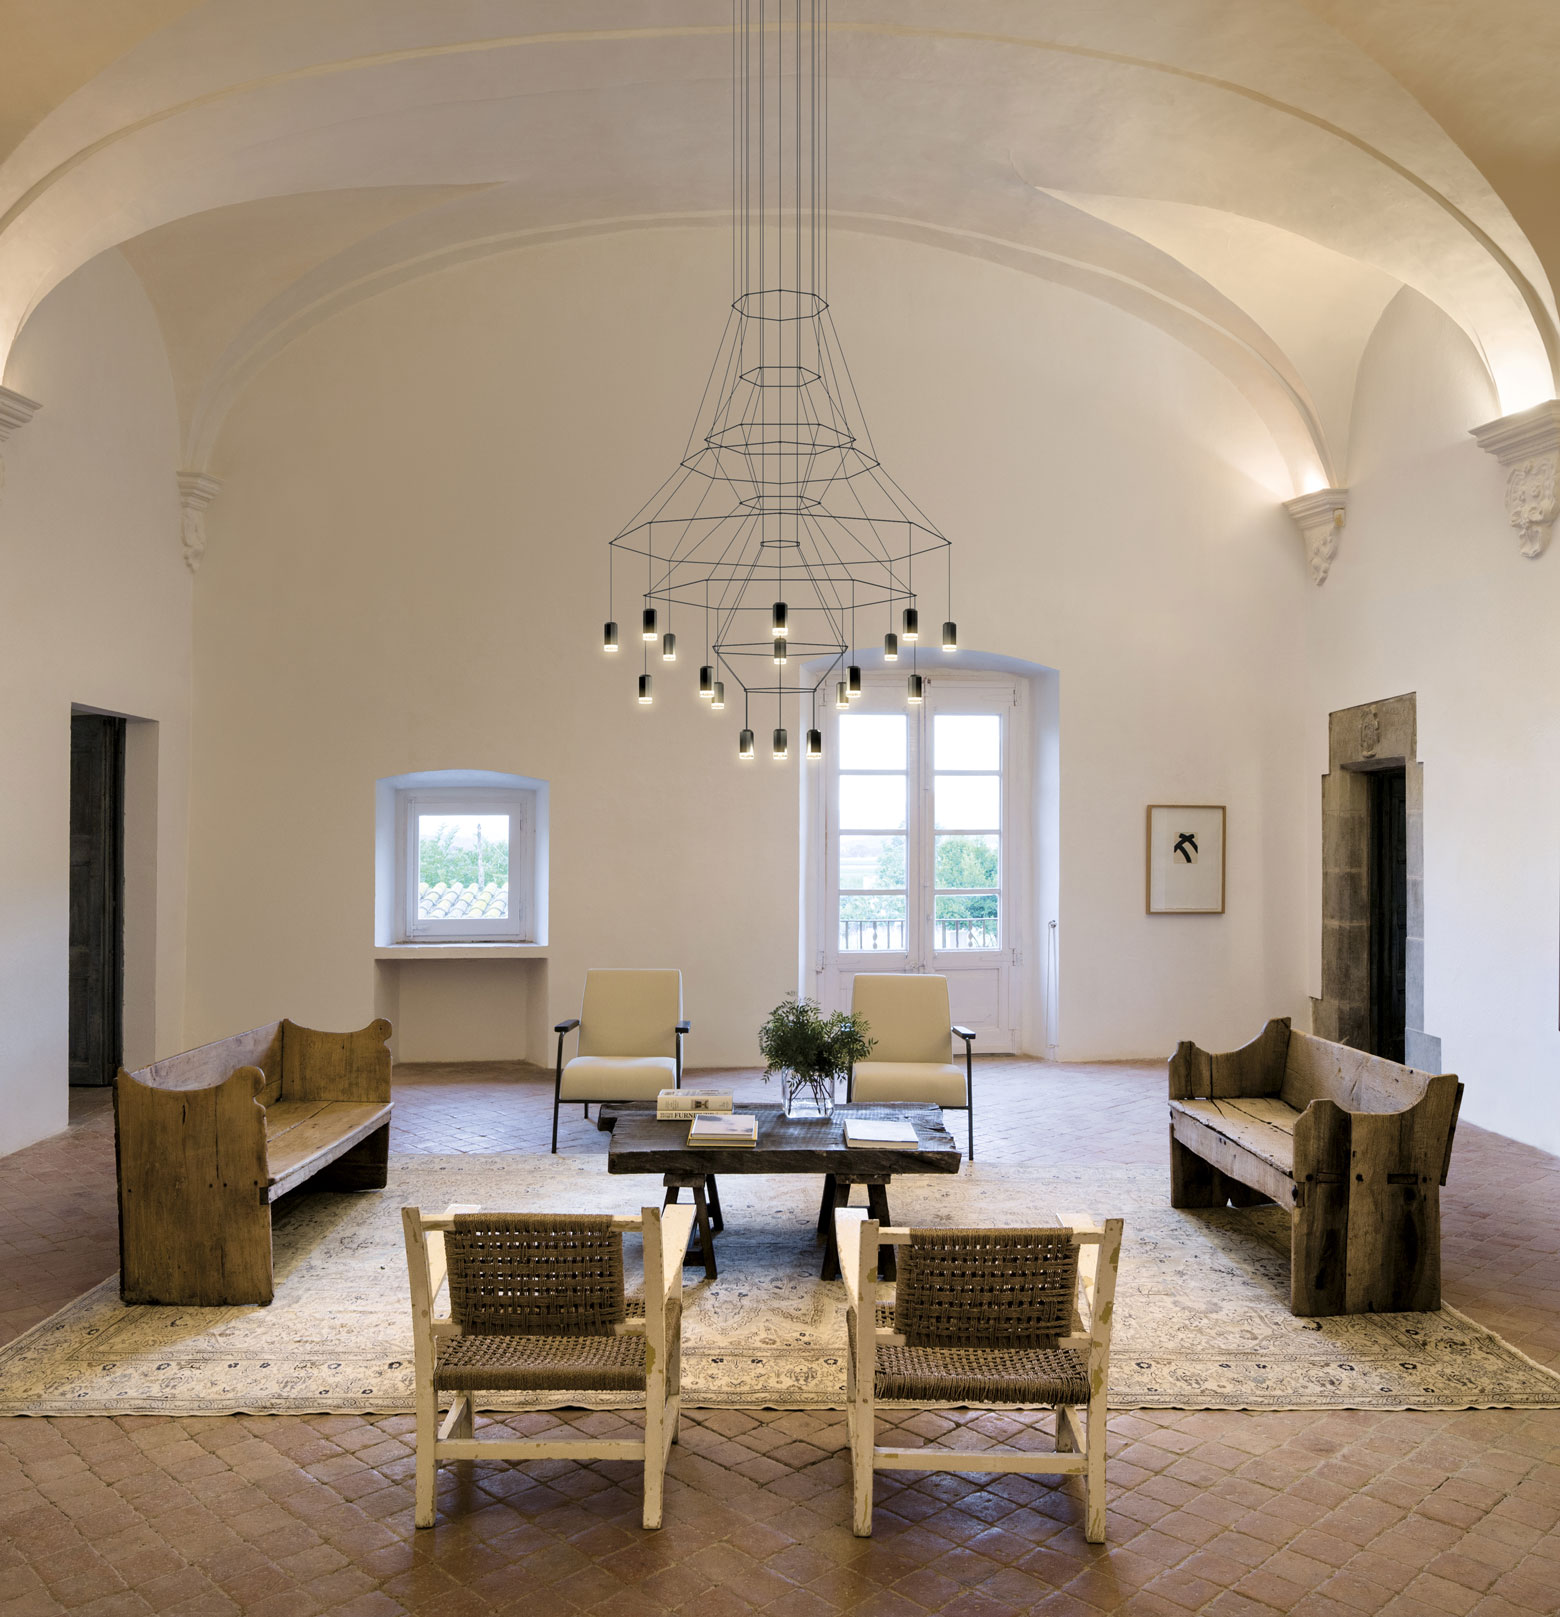 Vibia The Edit - Make A Design Statement With Dazzling Chandeliers - Wireflow